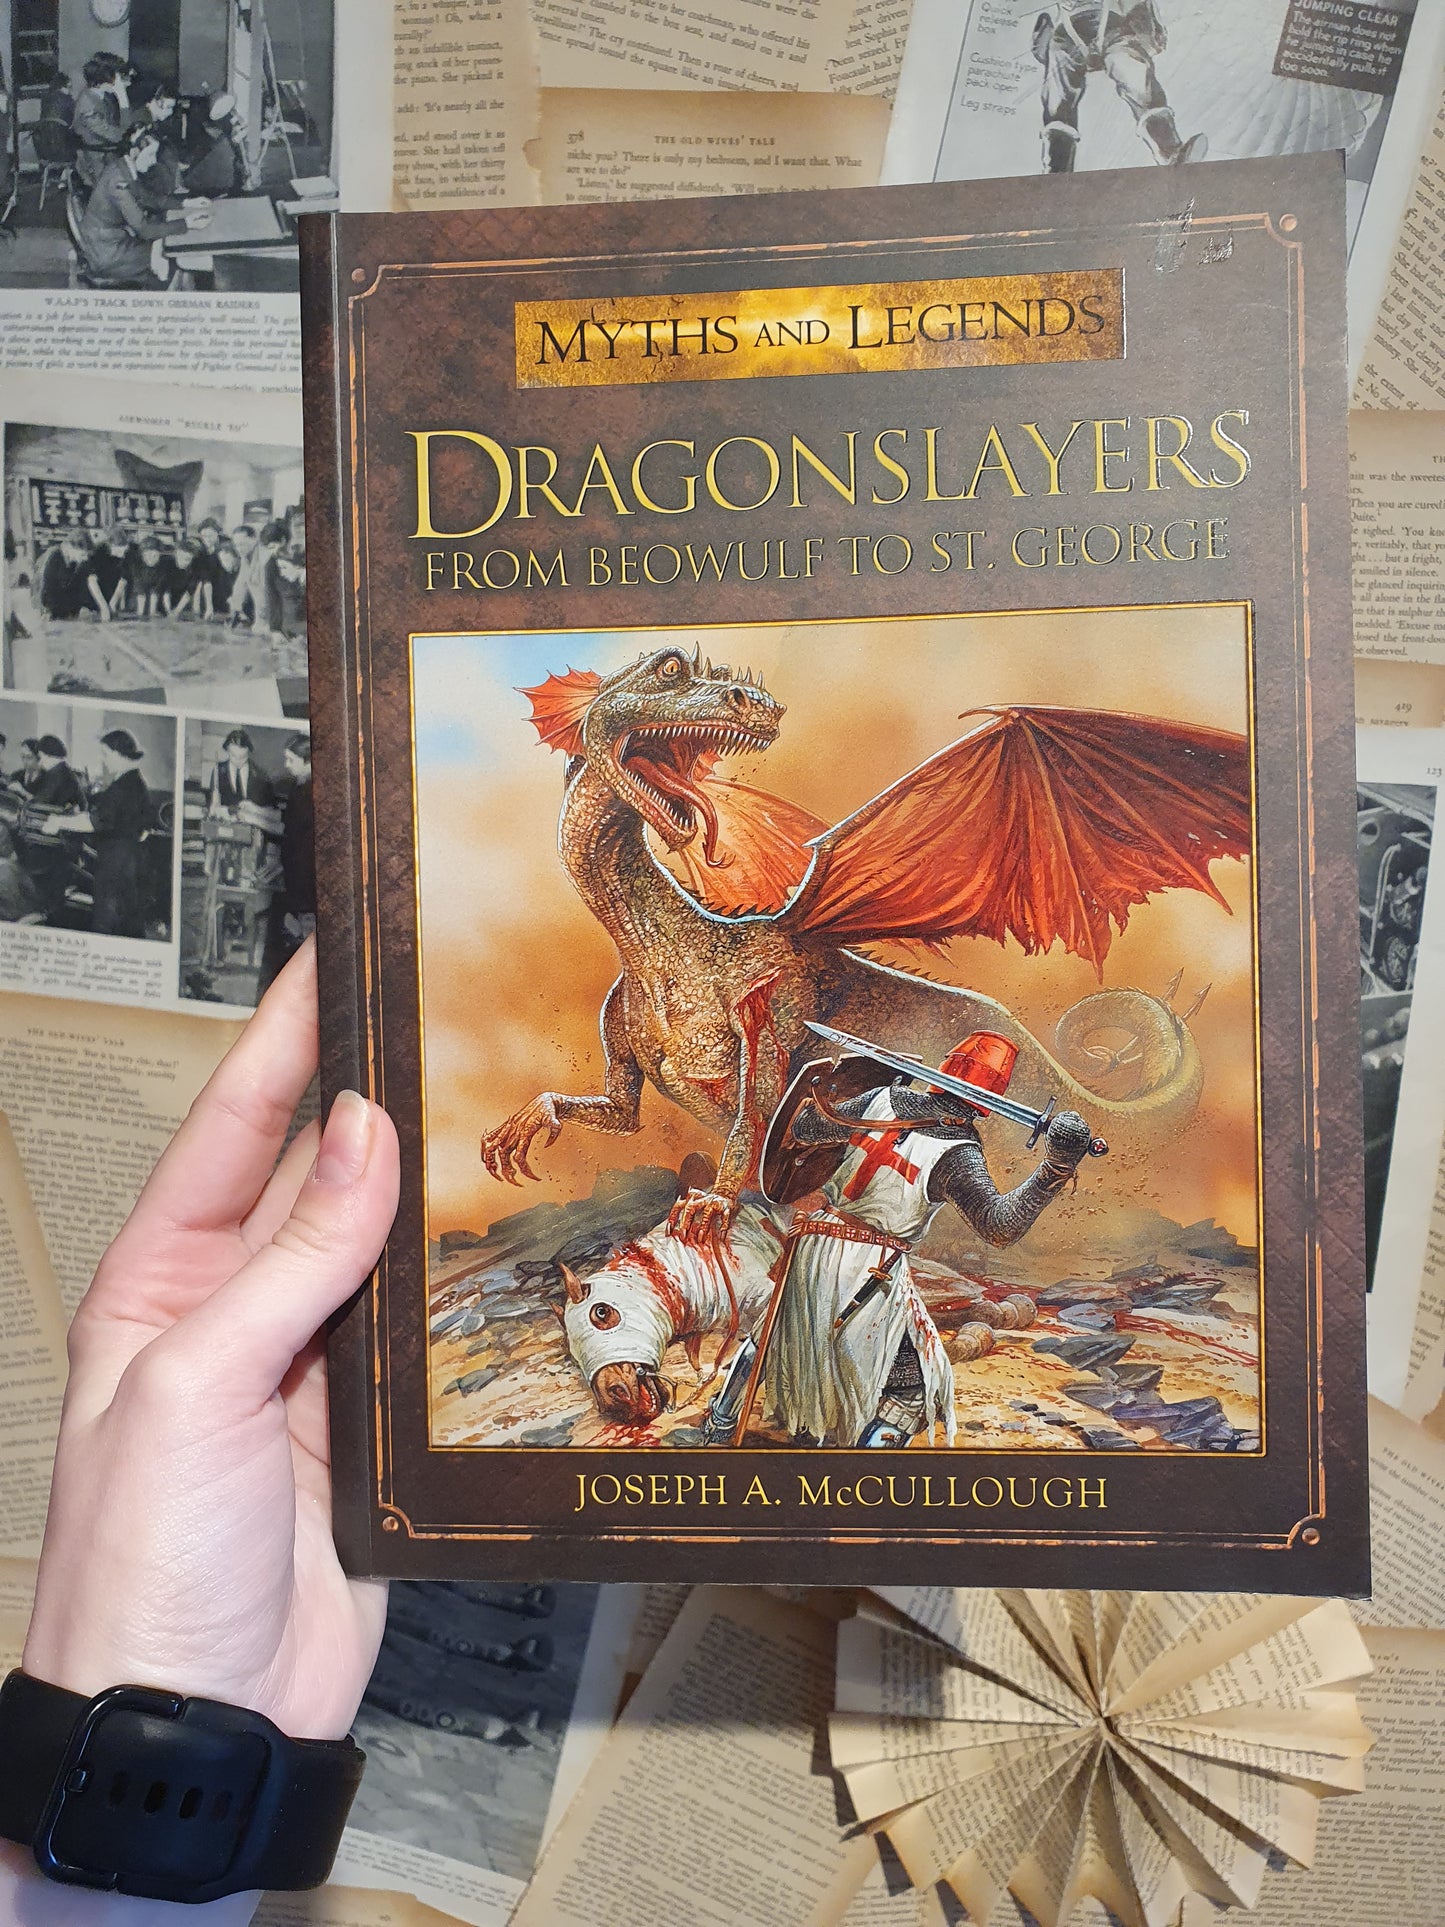 Myths and Legends: Dragonslayers by Joseph A McCullough (2013)